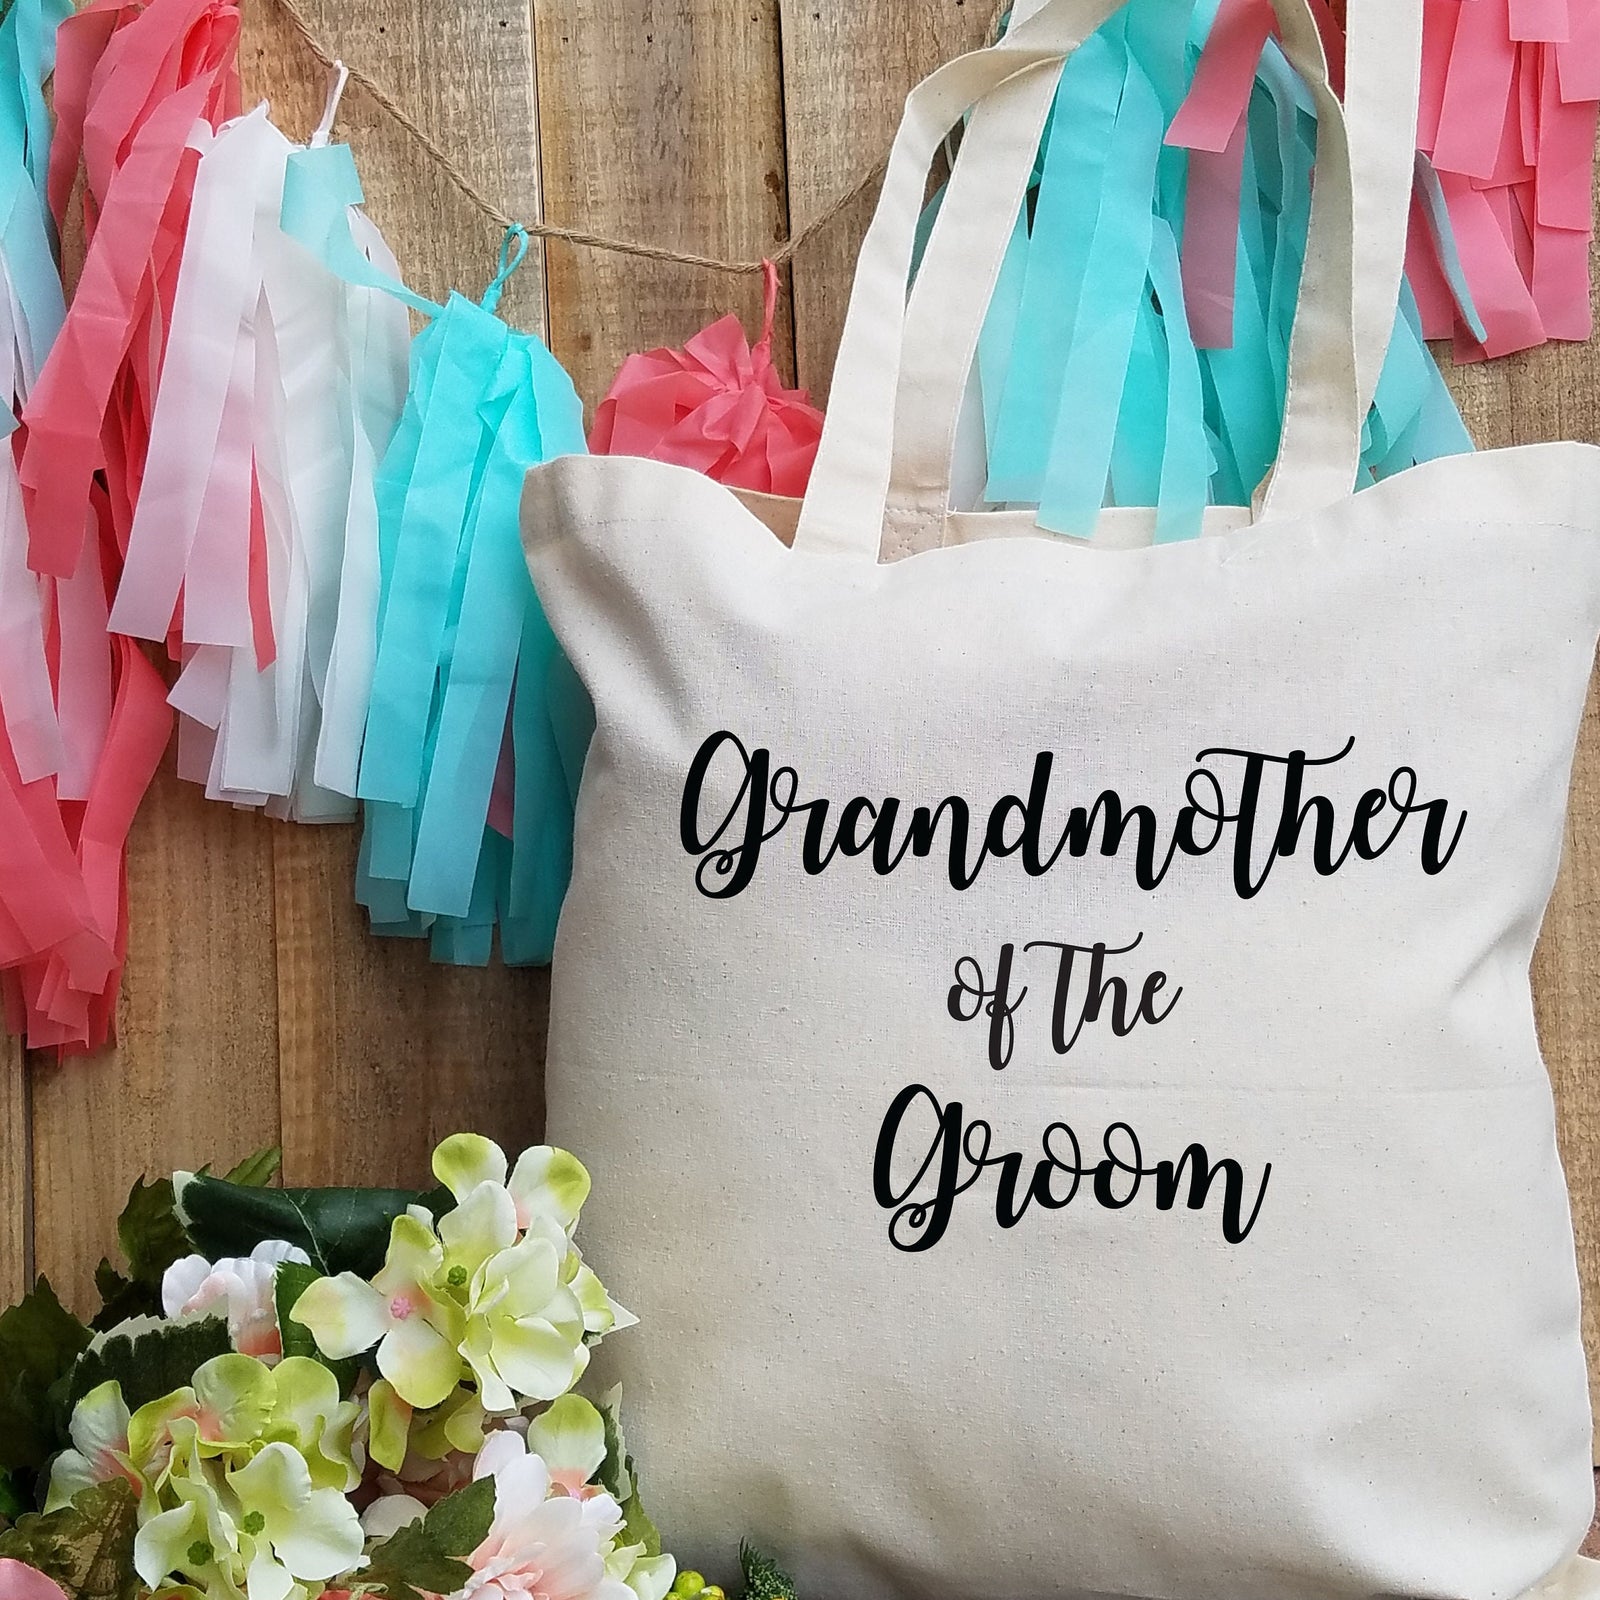 Grandmother of the Bride Tote - Grandmother of the Groom Tote - Wedding Party Gift